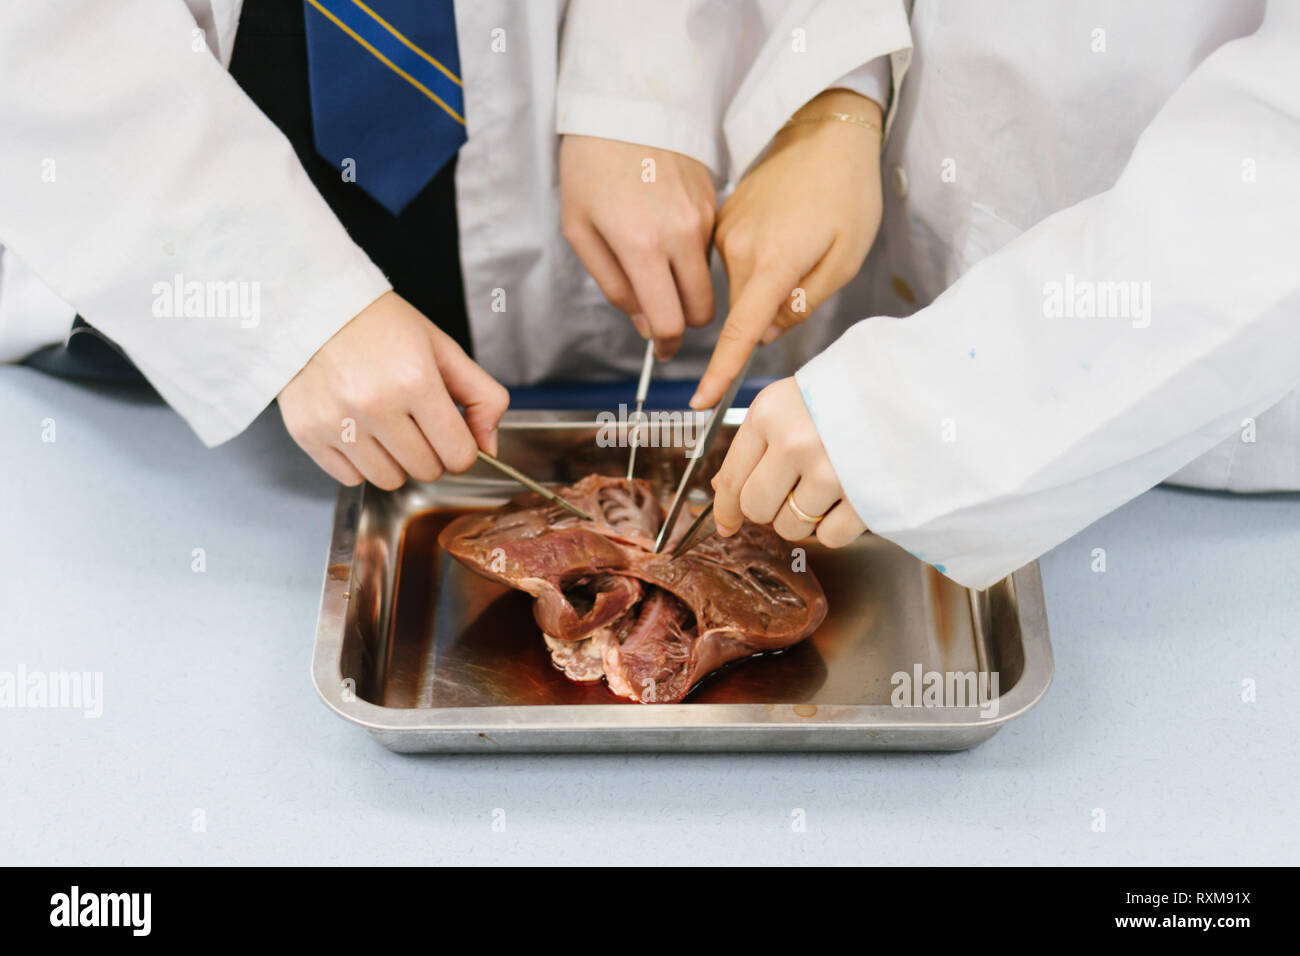 Students learning in anatomy biology class | Hands doing surgery exercise Stock Photo